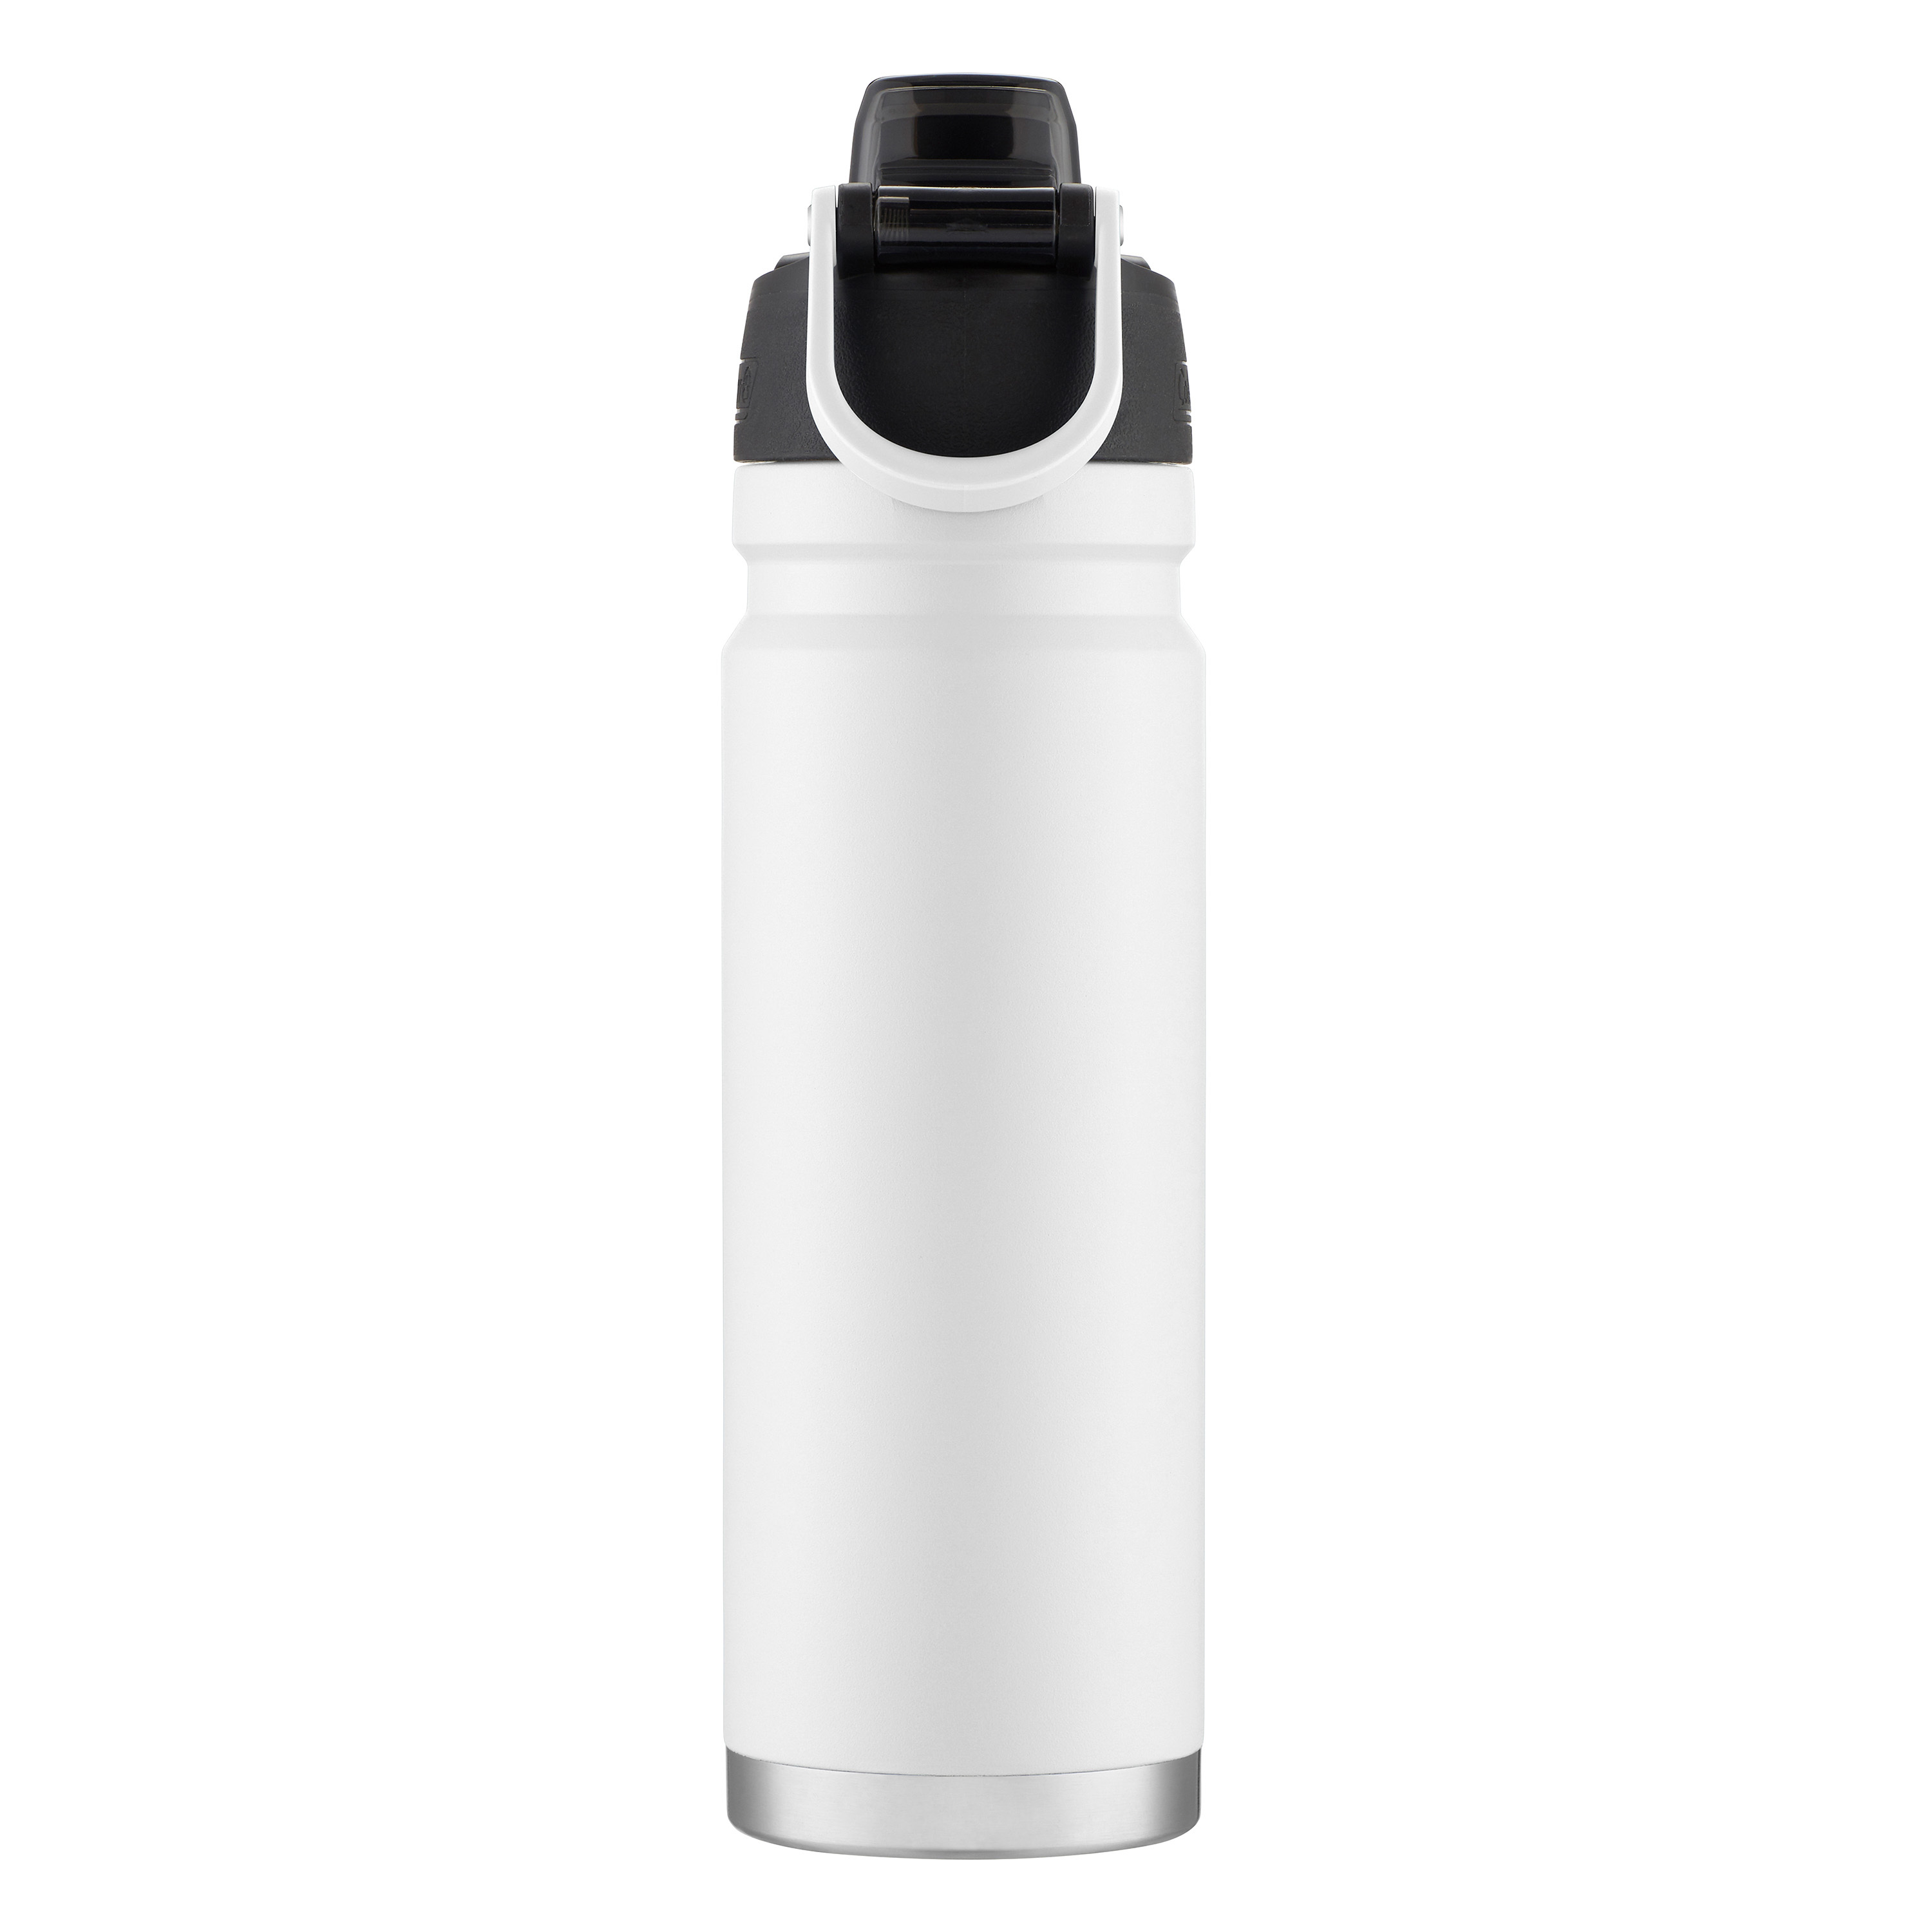 Coleman Burst Poptop Stainless Steel Insulated Water Bottle, 24 oz., White Cloud Color - image 3 of 8